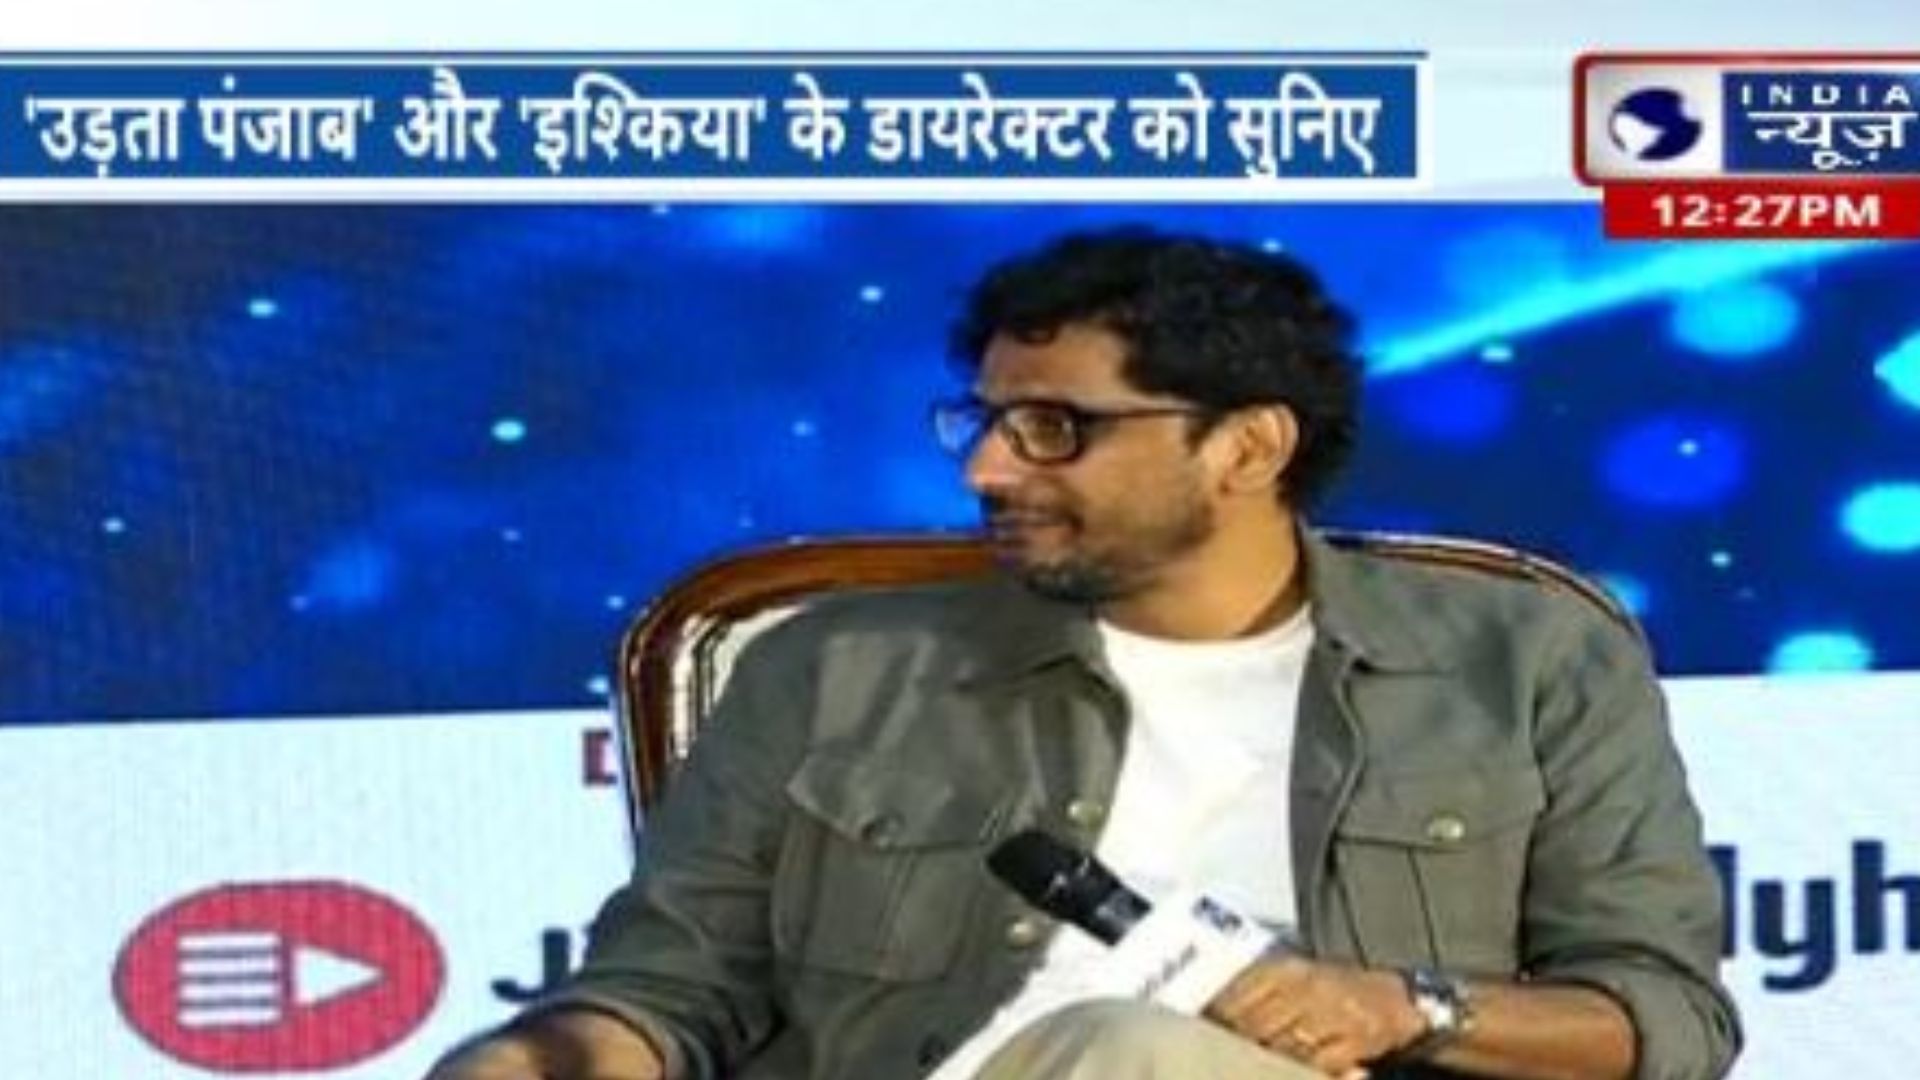 India News Manch 2023: Abhishek Chaubey mentioned Sushant Singh Rajput on India News Manch, find out what he said